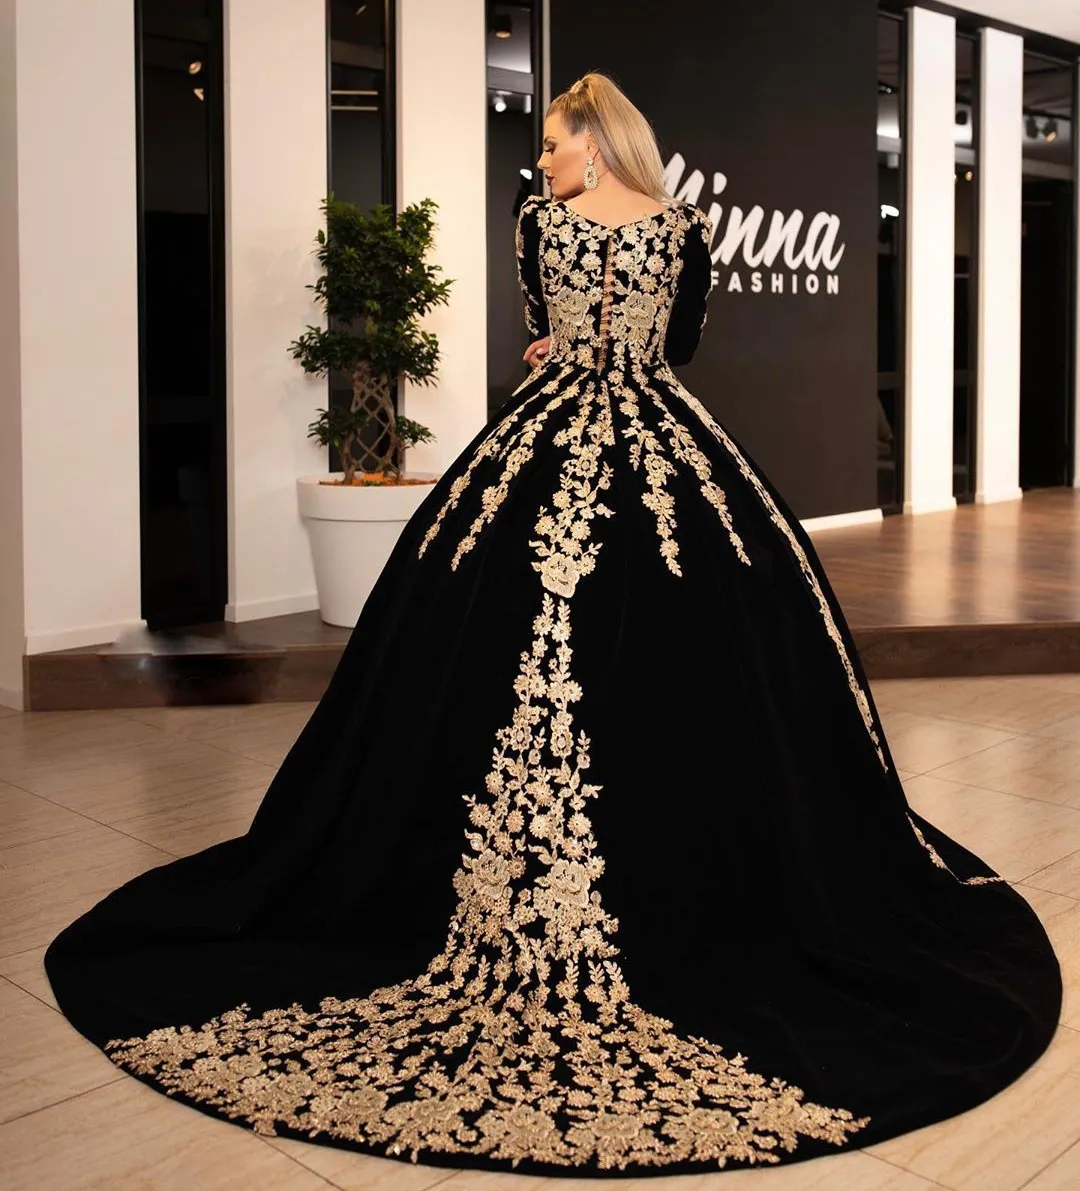 Dress Day - Black evening gown with long train and white accents - CleanPNG  / KissPNG